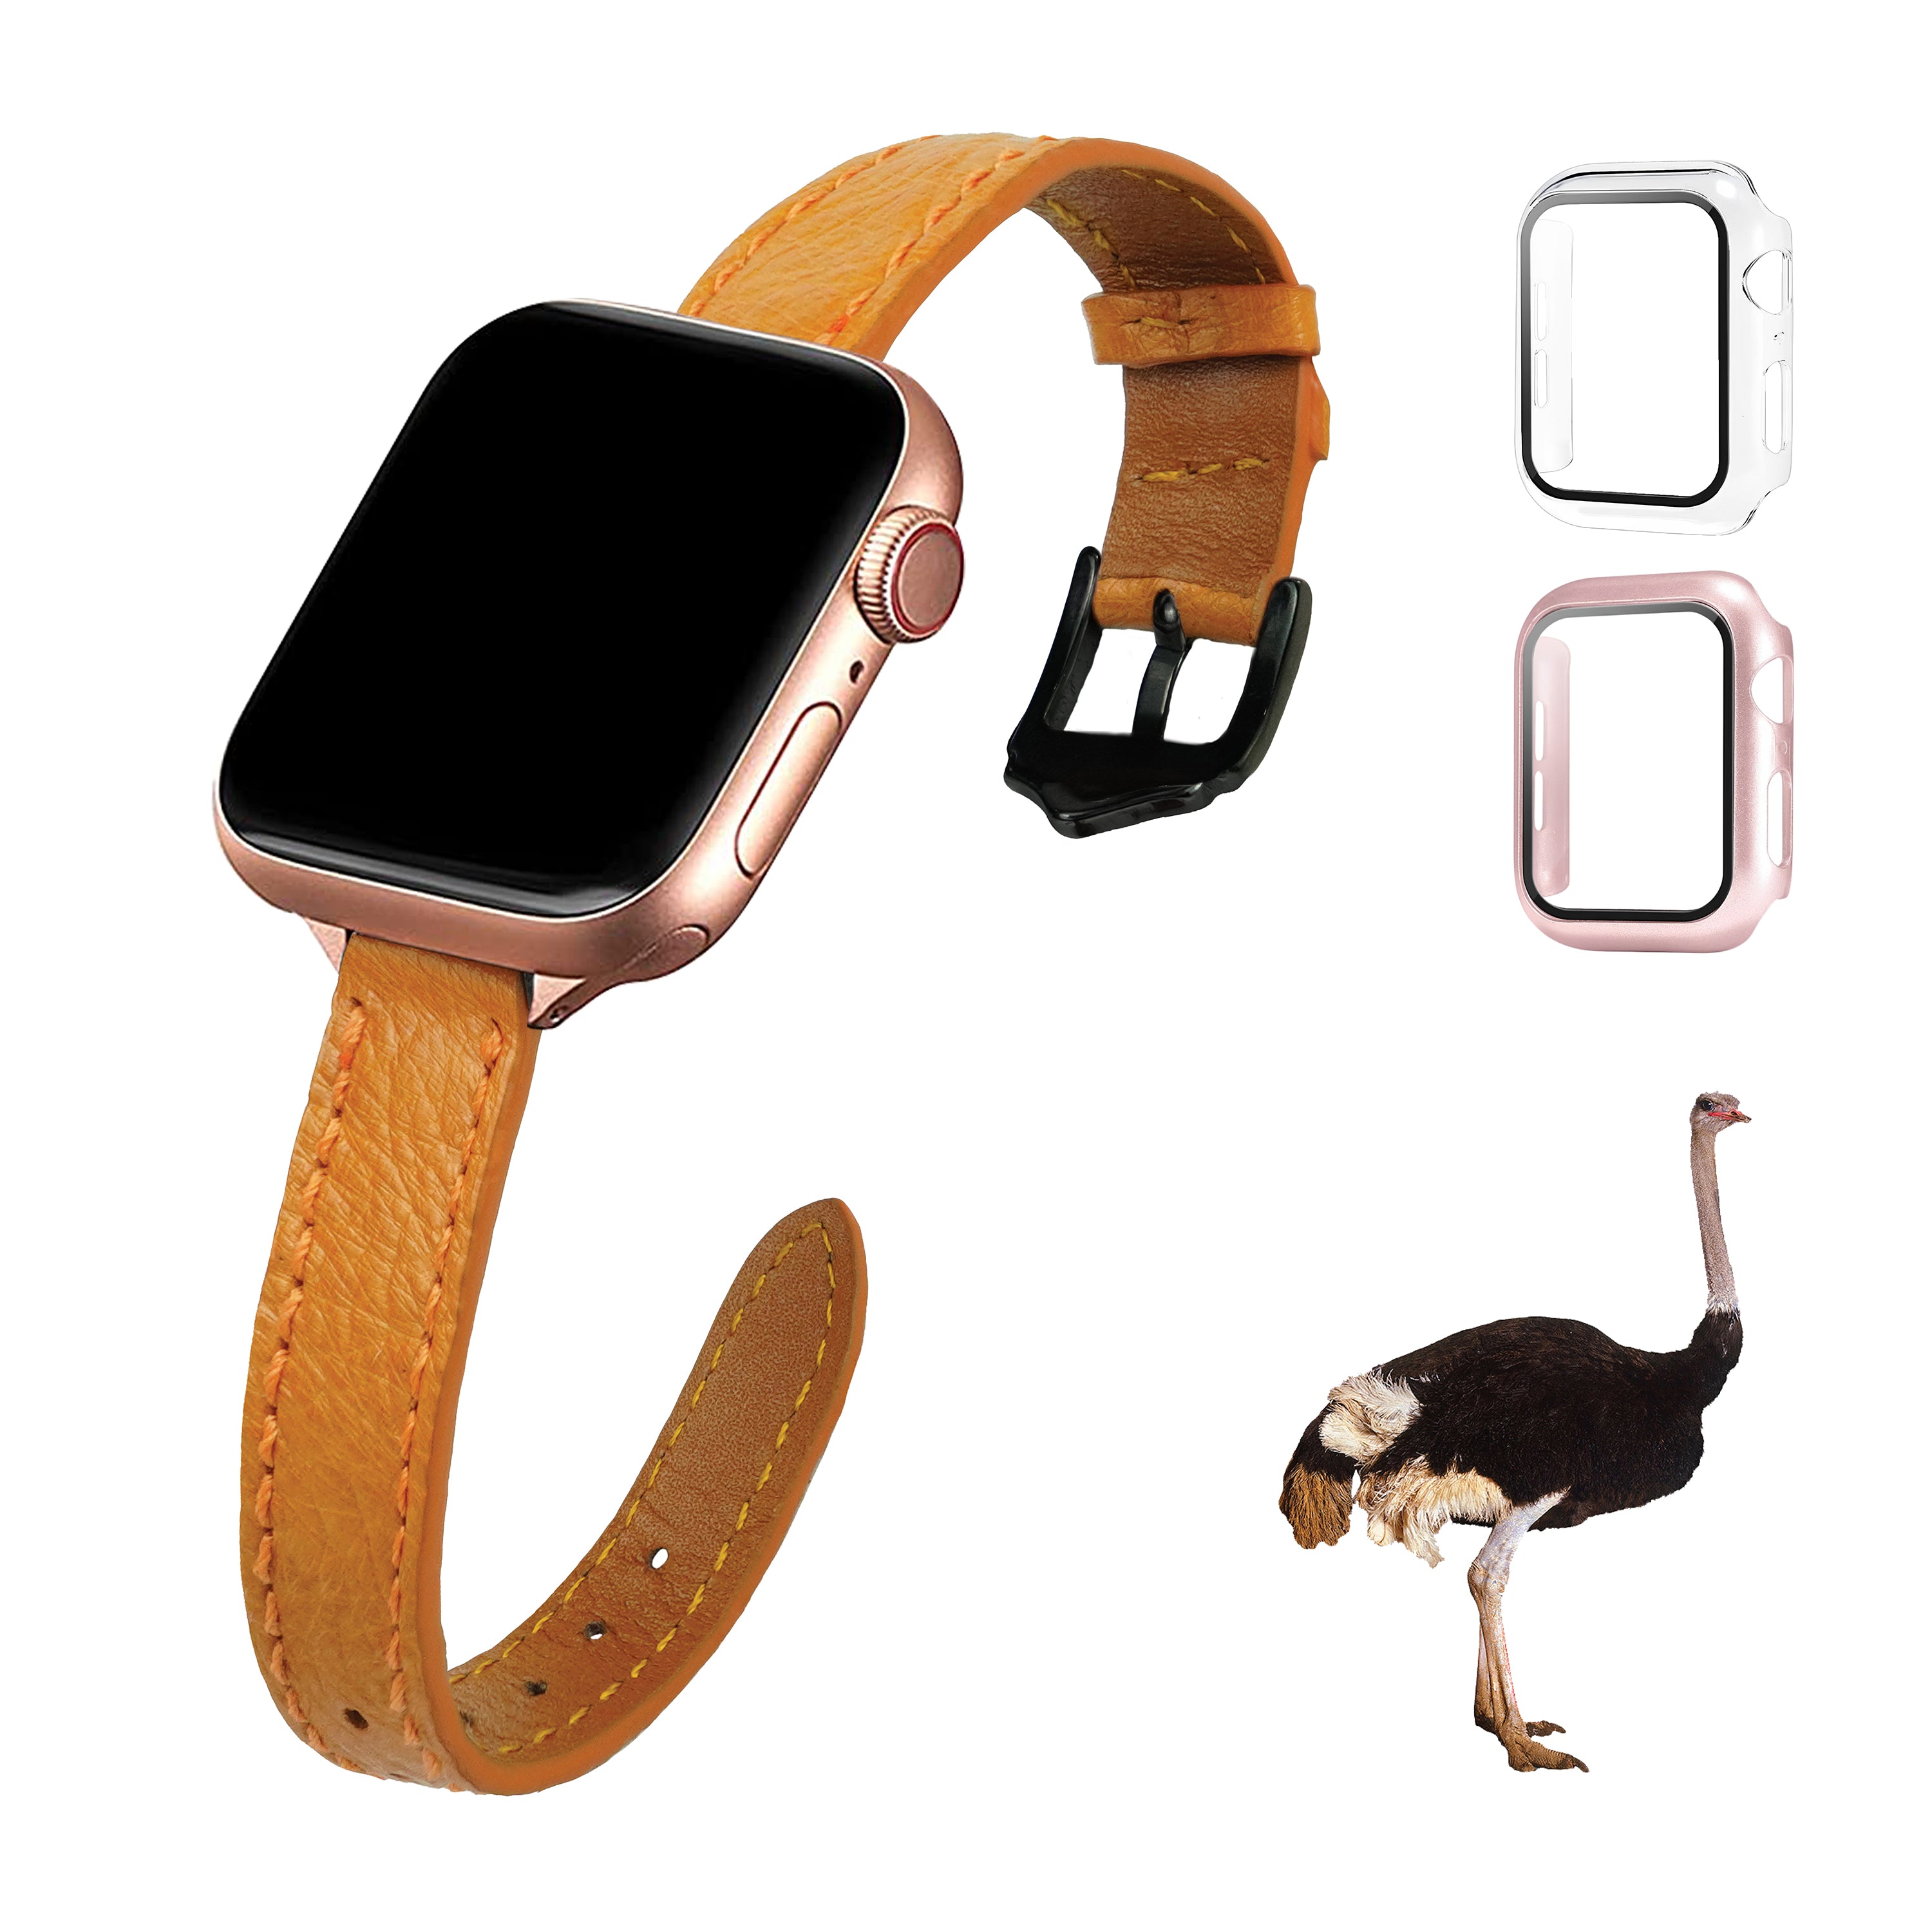 Tan Flat Ostrich Leather Band Compatible Apple Watch Iwatch 38mm Screen Protector Case Black Adapter Replacement Strap For Smartwatch Series 1 2 3 Leather Handmade AW-182B-W-38MM